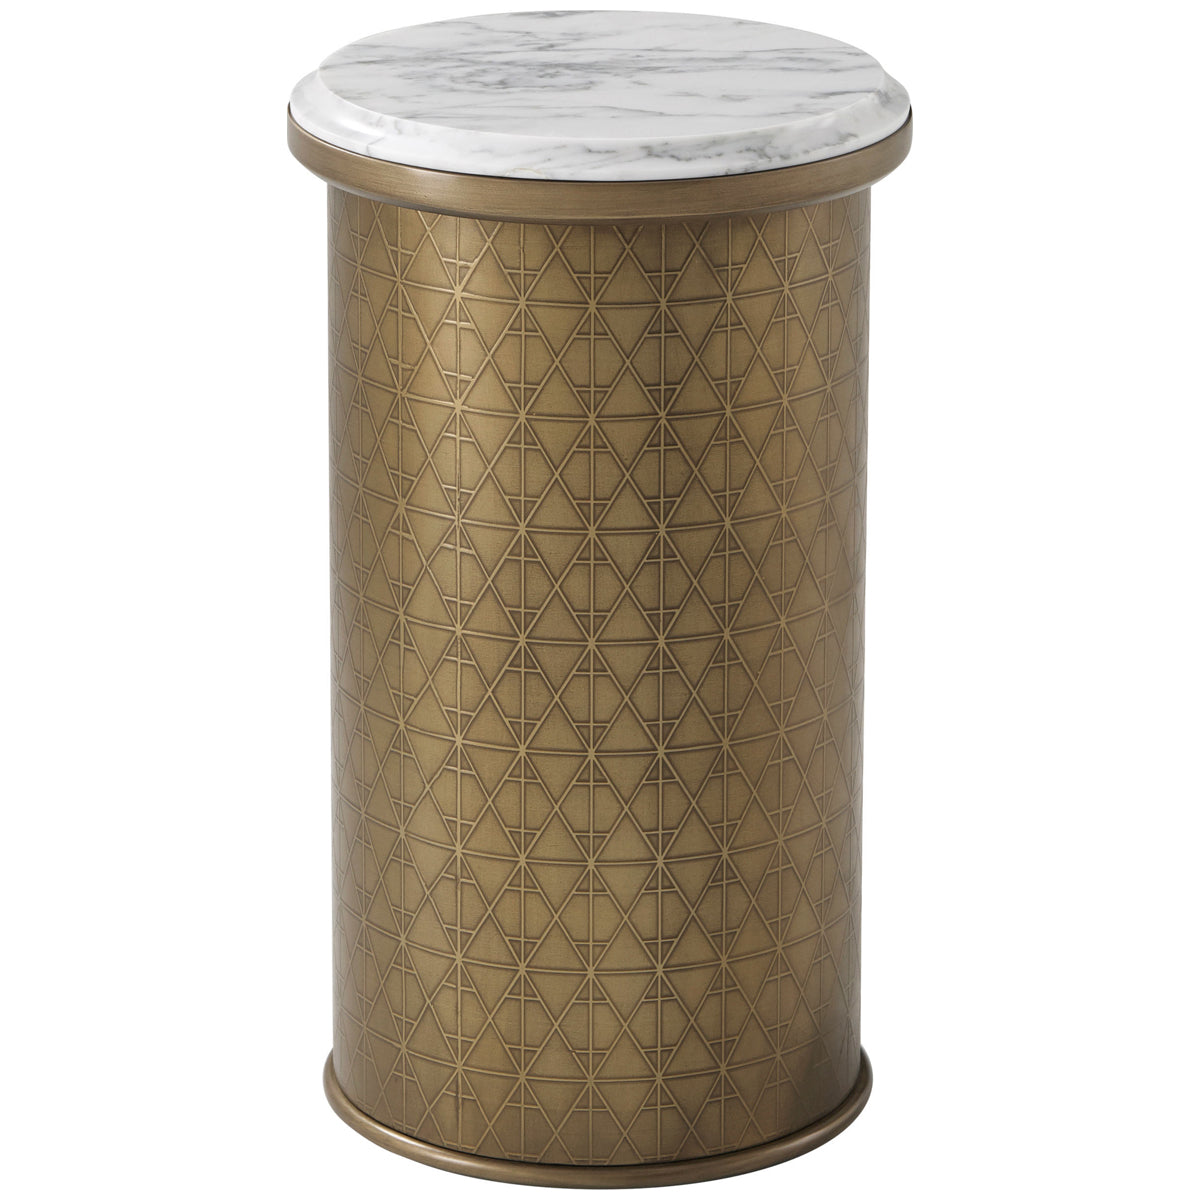 Theodore Alexander Iconic Round Accent Table